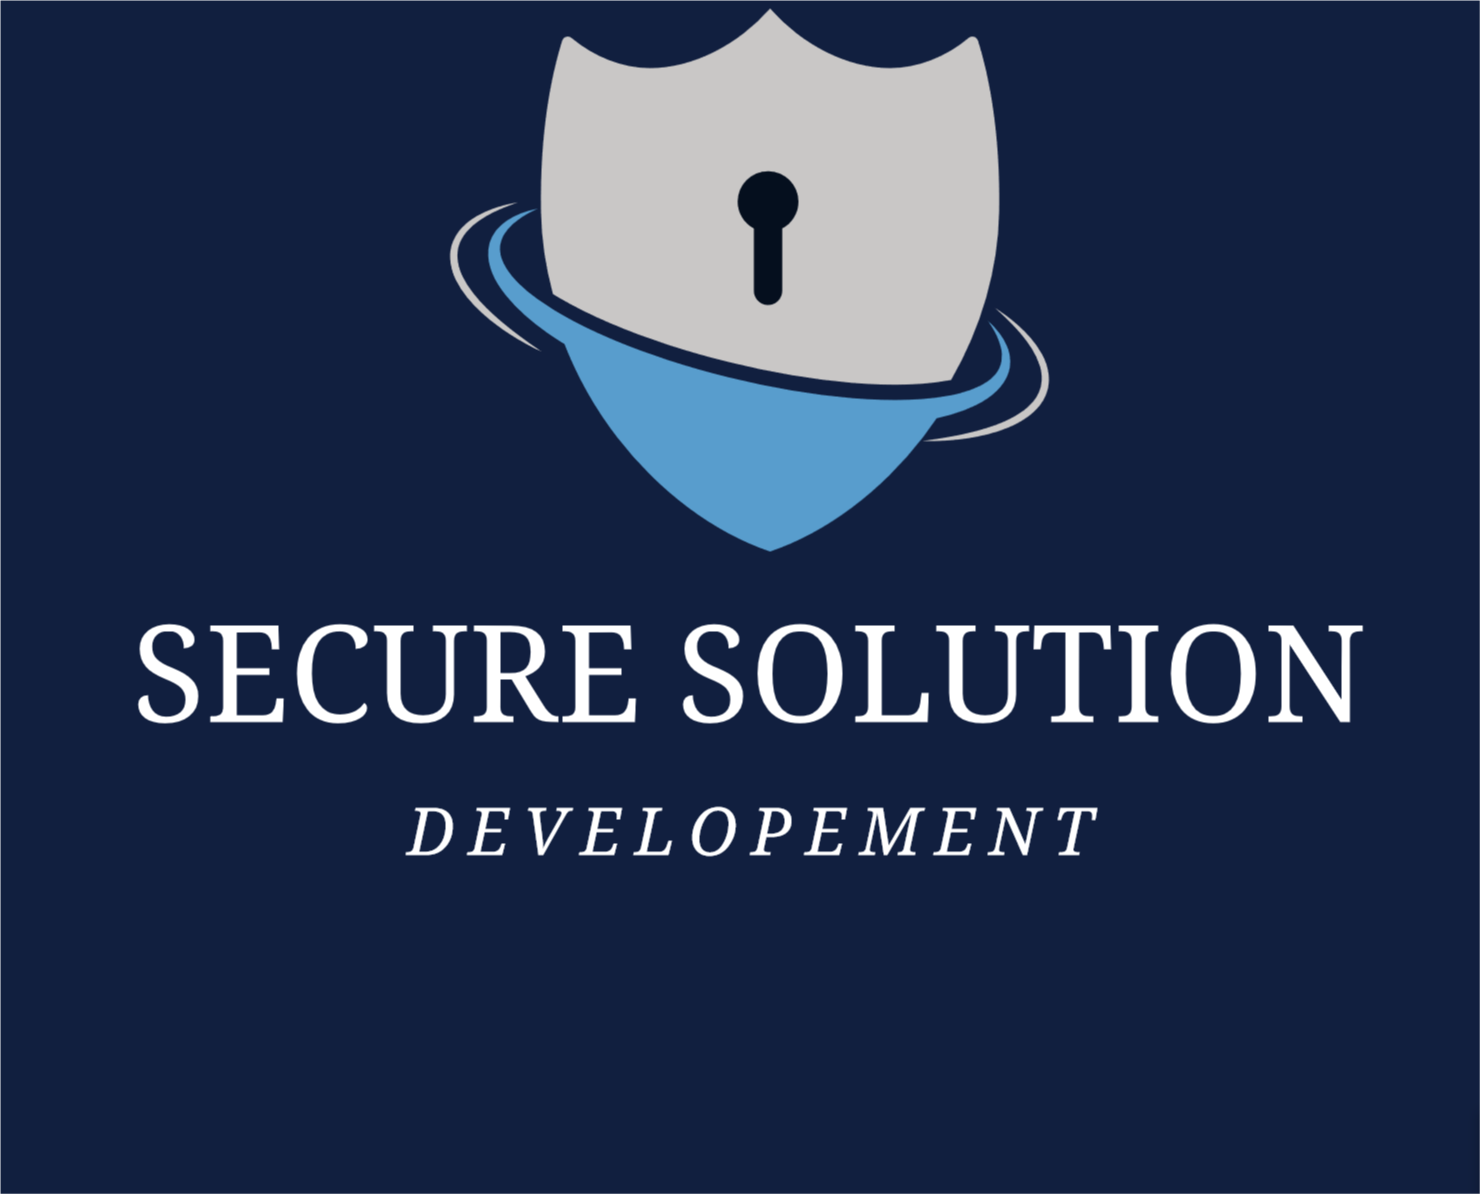 How to develop more secure solutions without the hassle